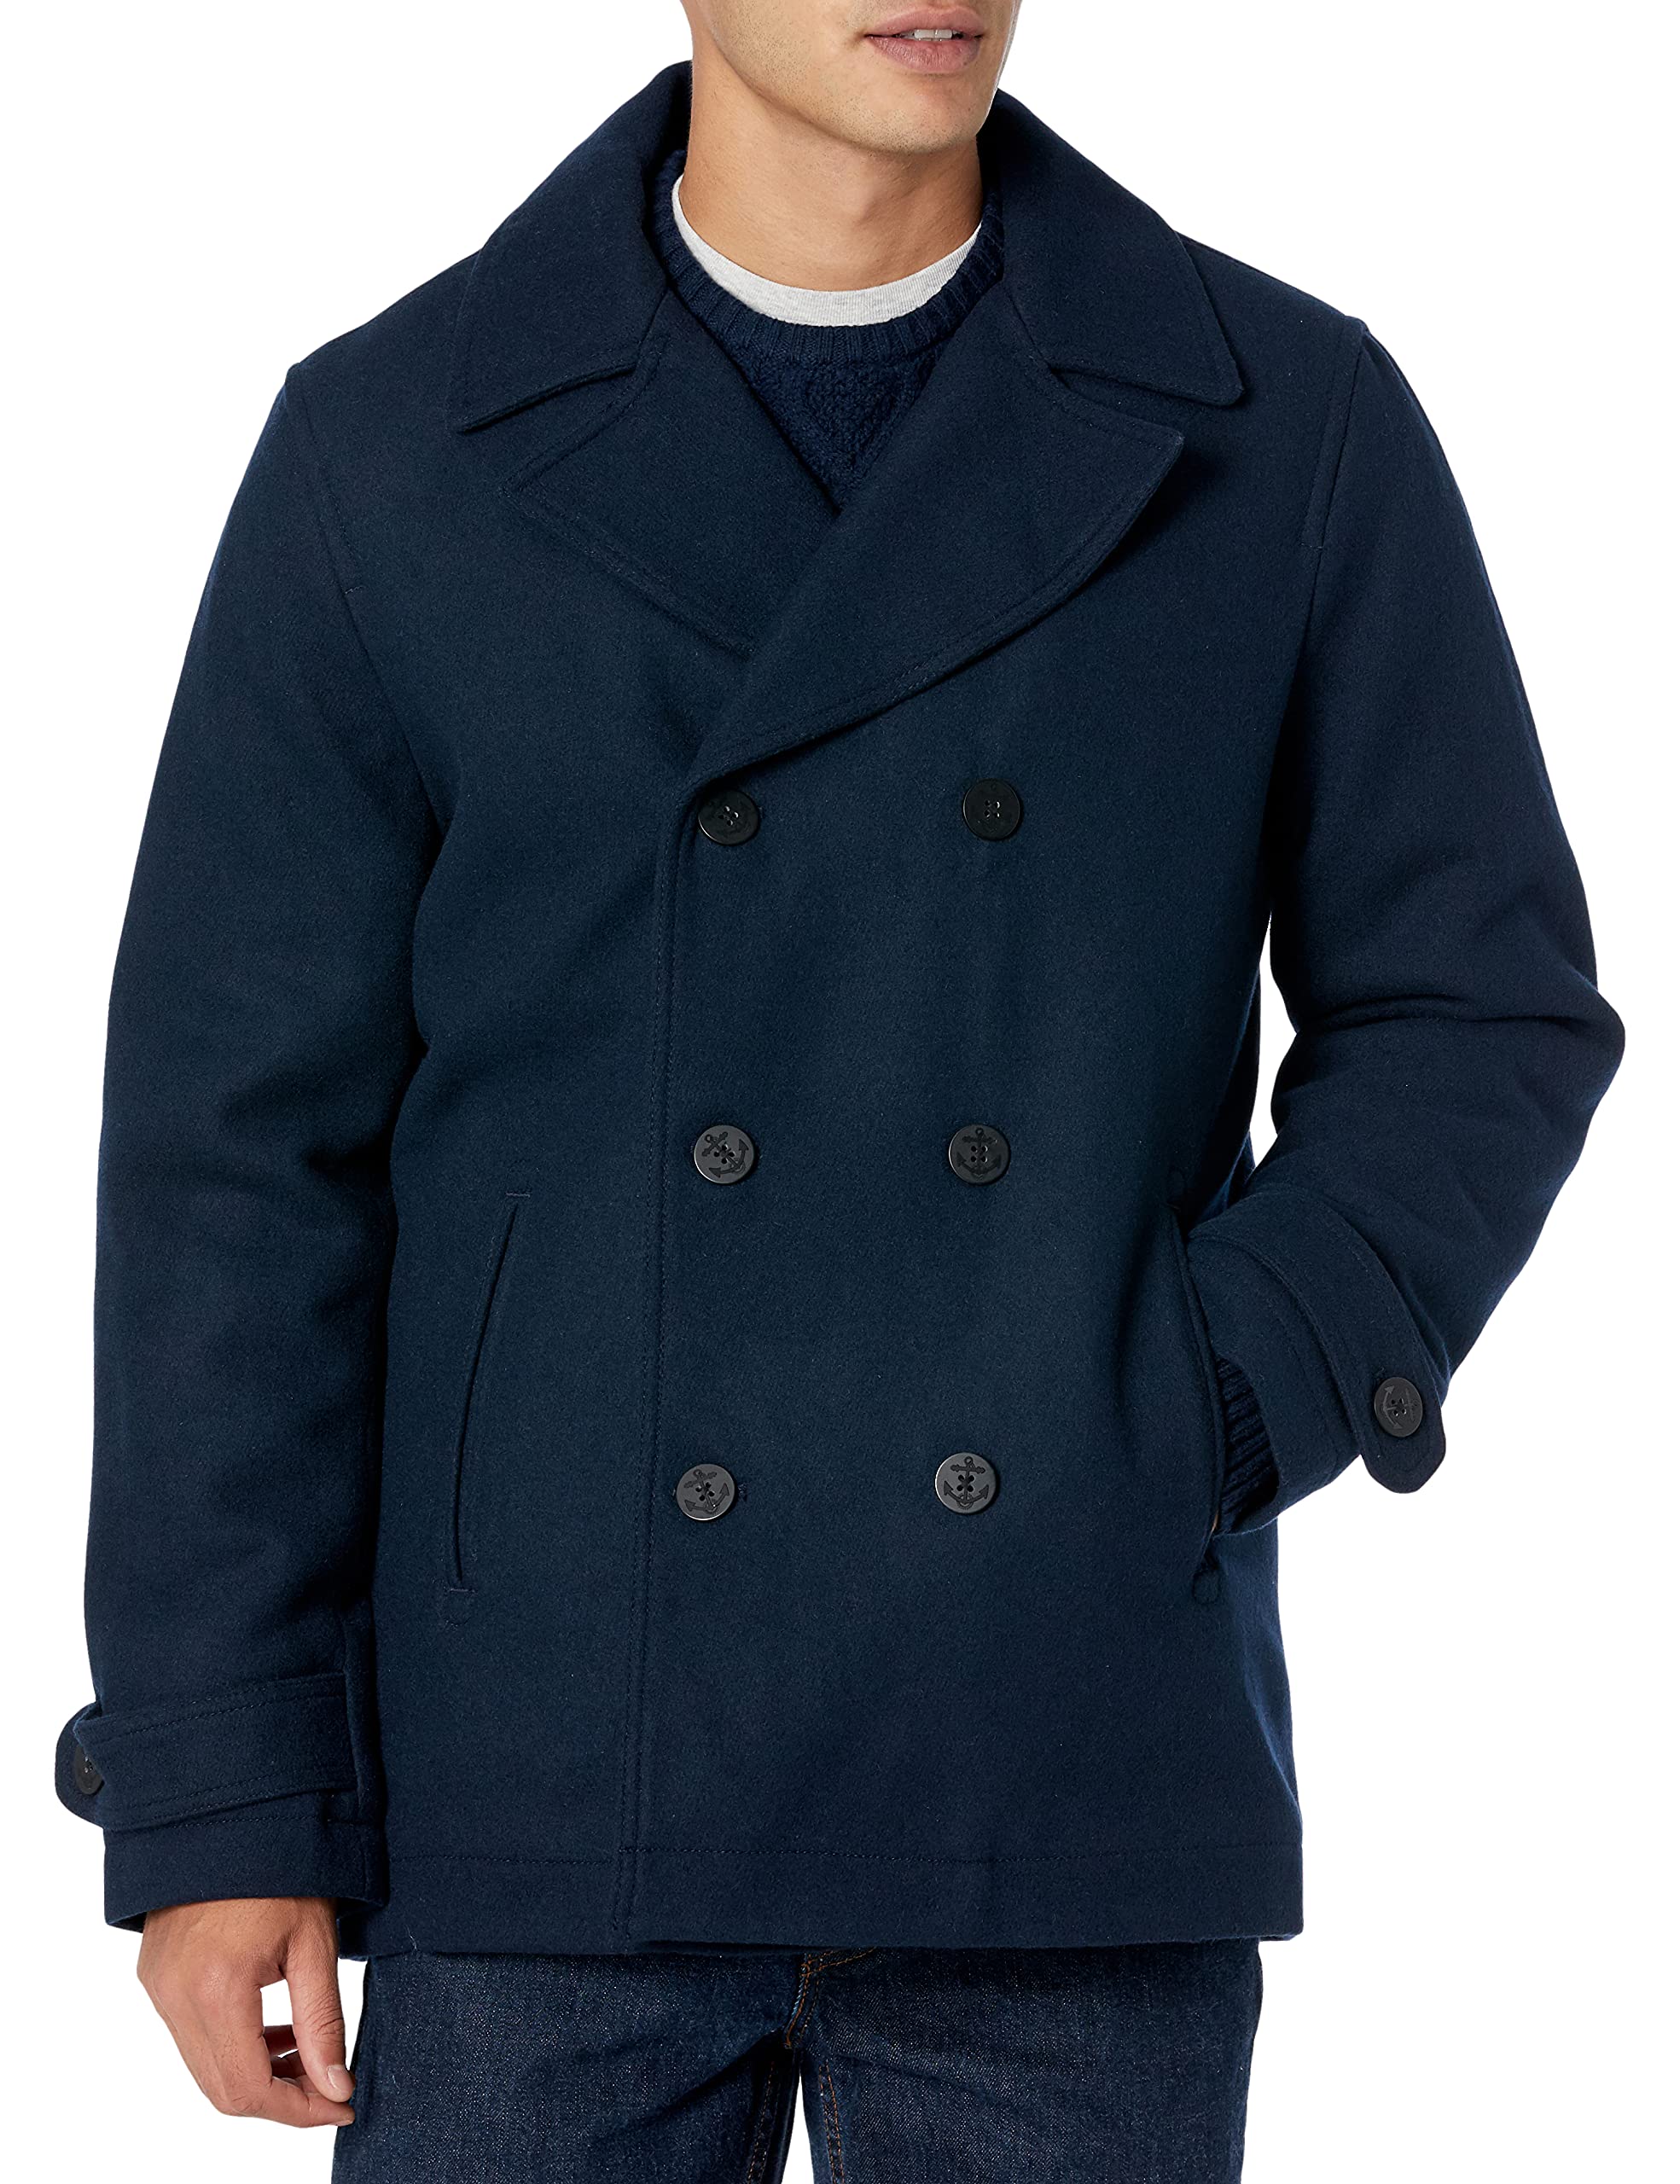 Amazon Essentials Men's Double-Breasted Heavyweight Wool Blend Peacoat